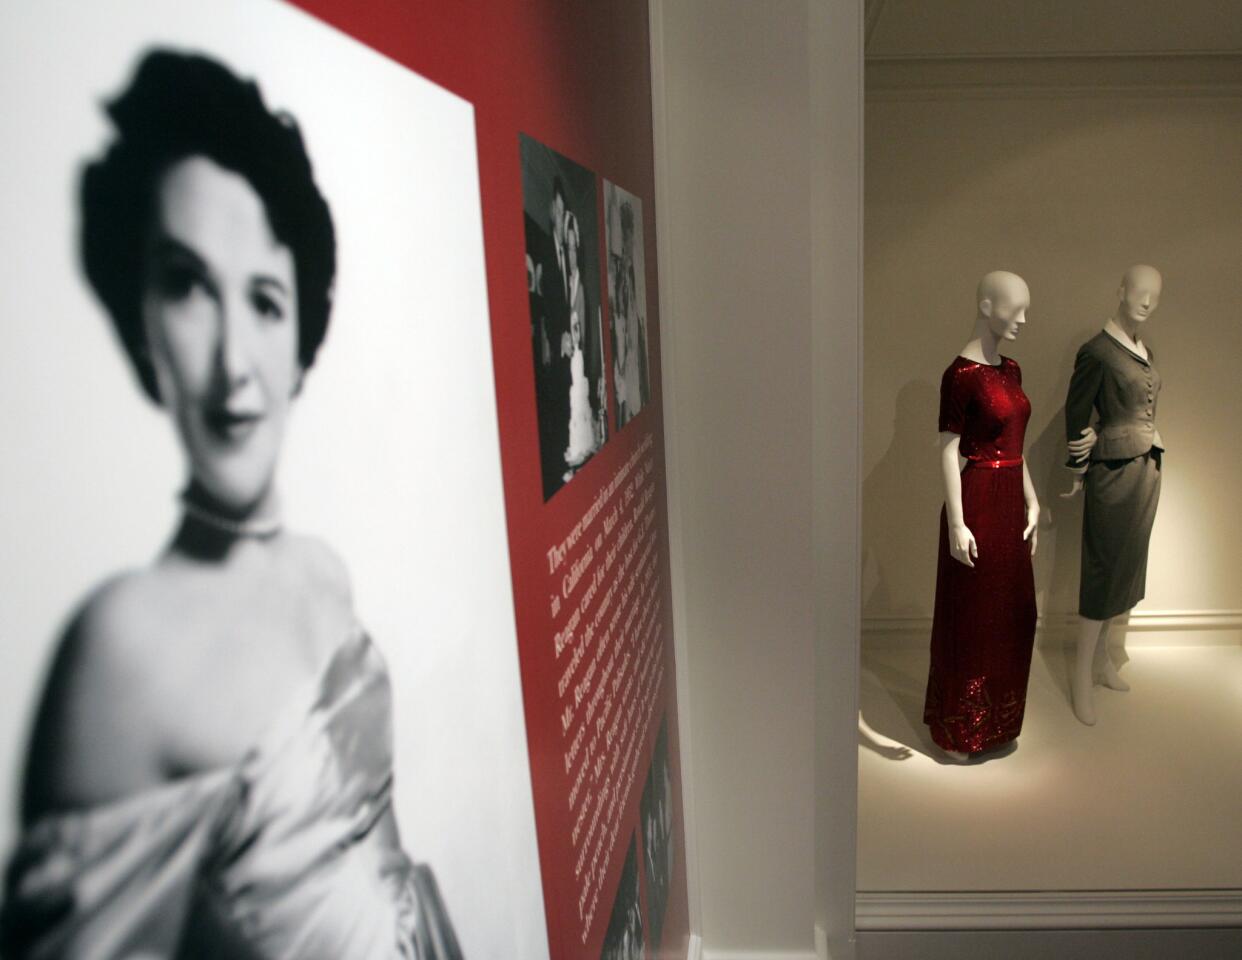 Former First Lady Nancy Reagan's collection of suits and gowns were on display in 2007 at the Ronald Reagan Presidential Library in Simi Valley. William Rush Jenkins designed the display.